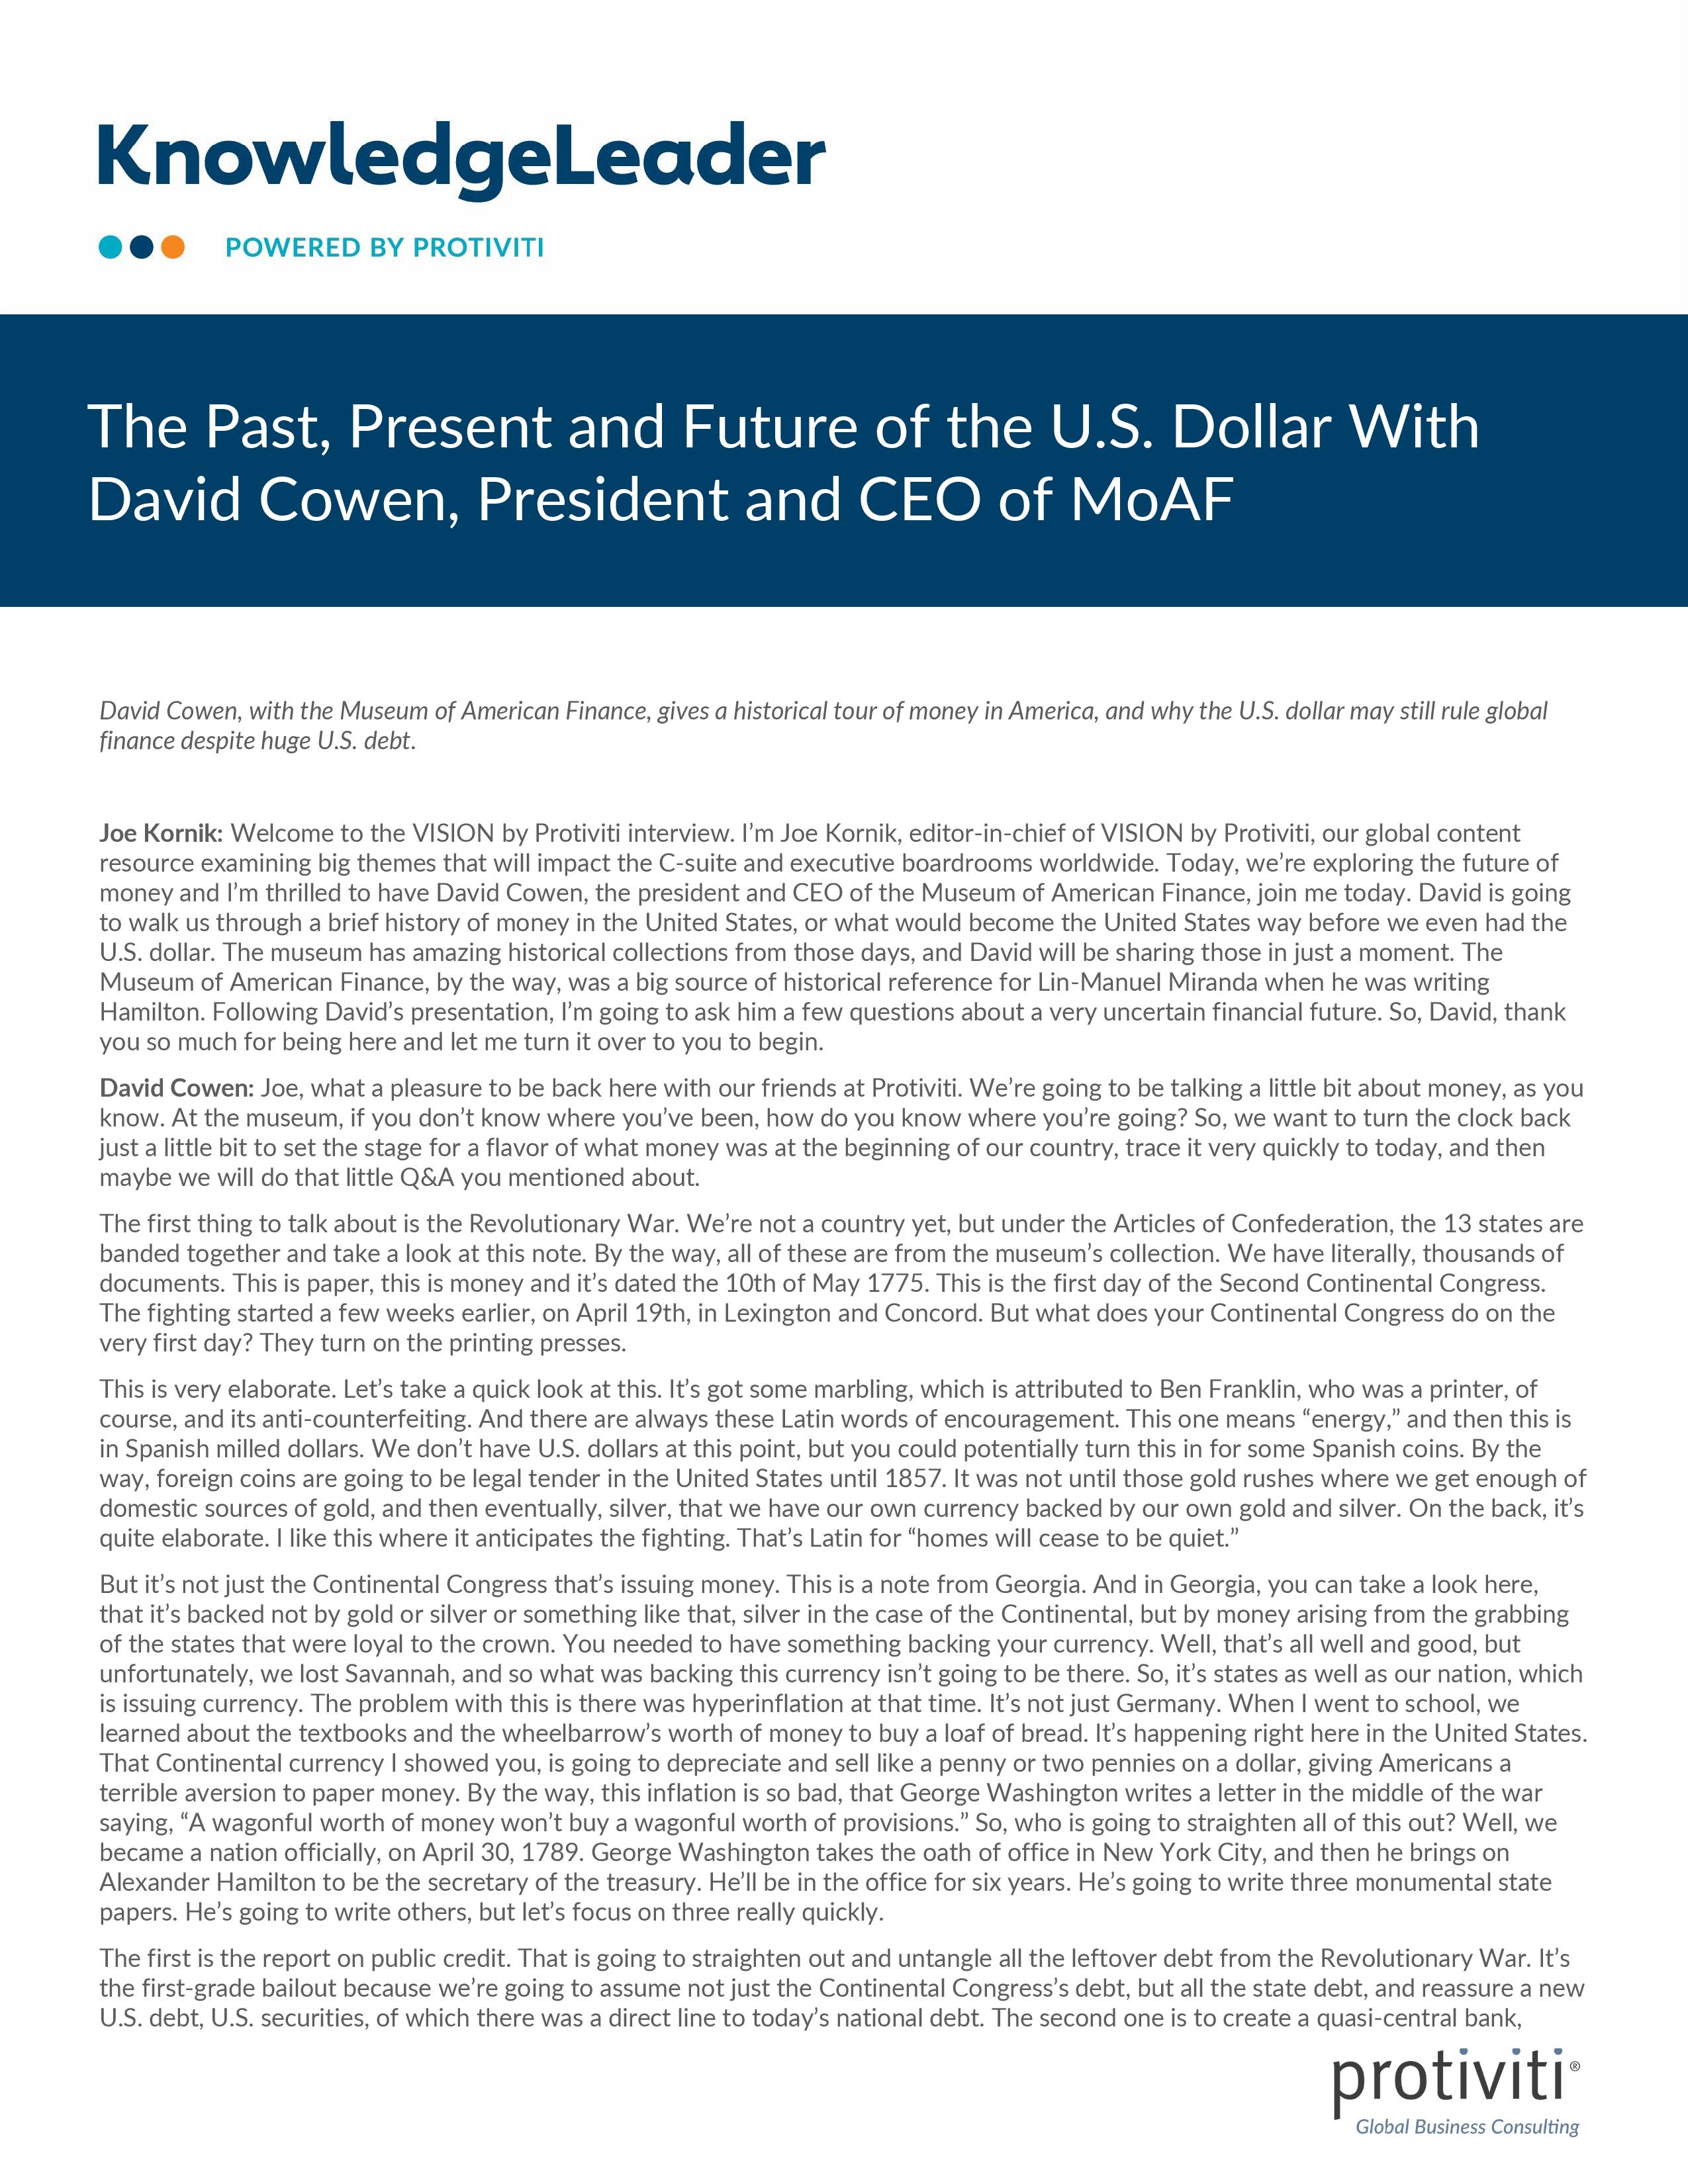 screenshot of the first page of The Past, Present and Future of the U.S. Dollar With David Cowen, President and CEO of MoAF